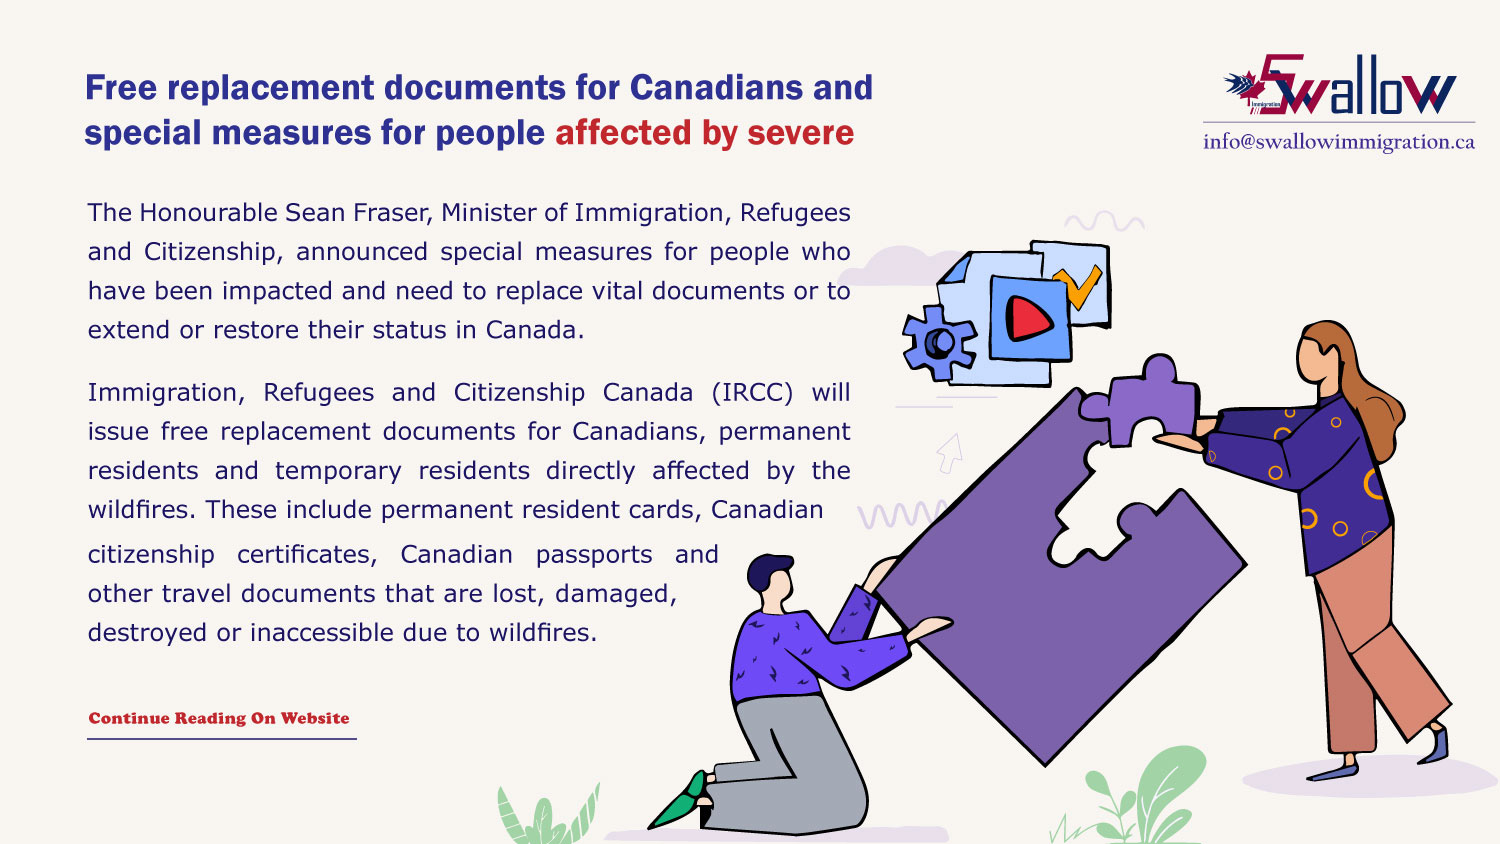 Free replacement documents for Canadians and special measures for people affected by severe wildfires